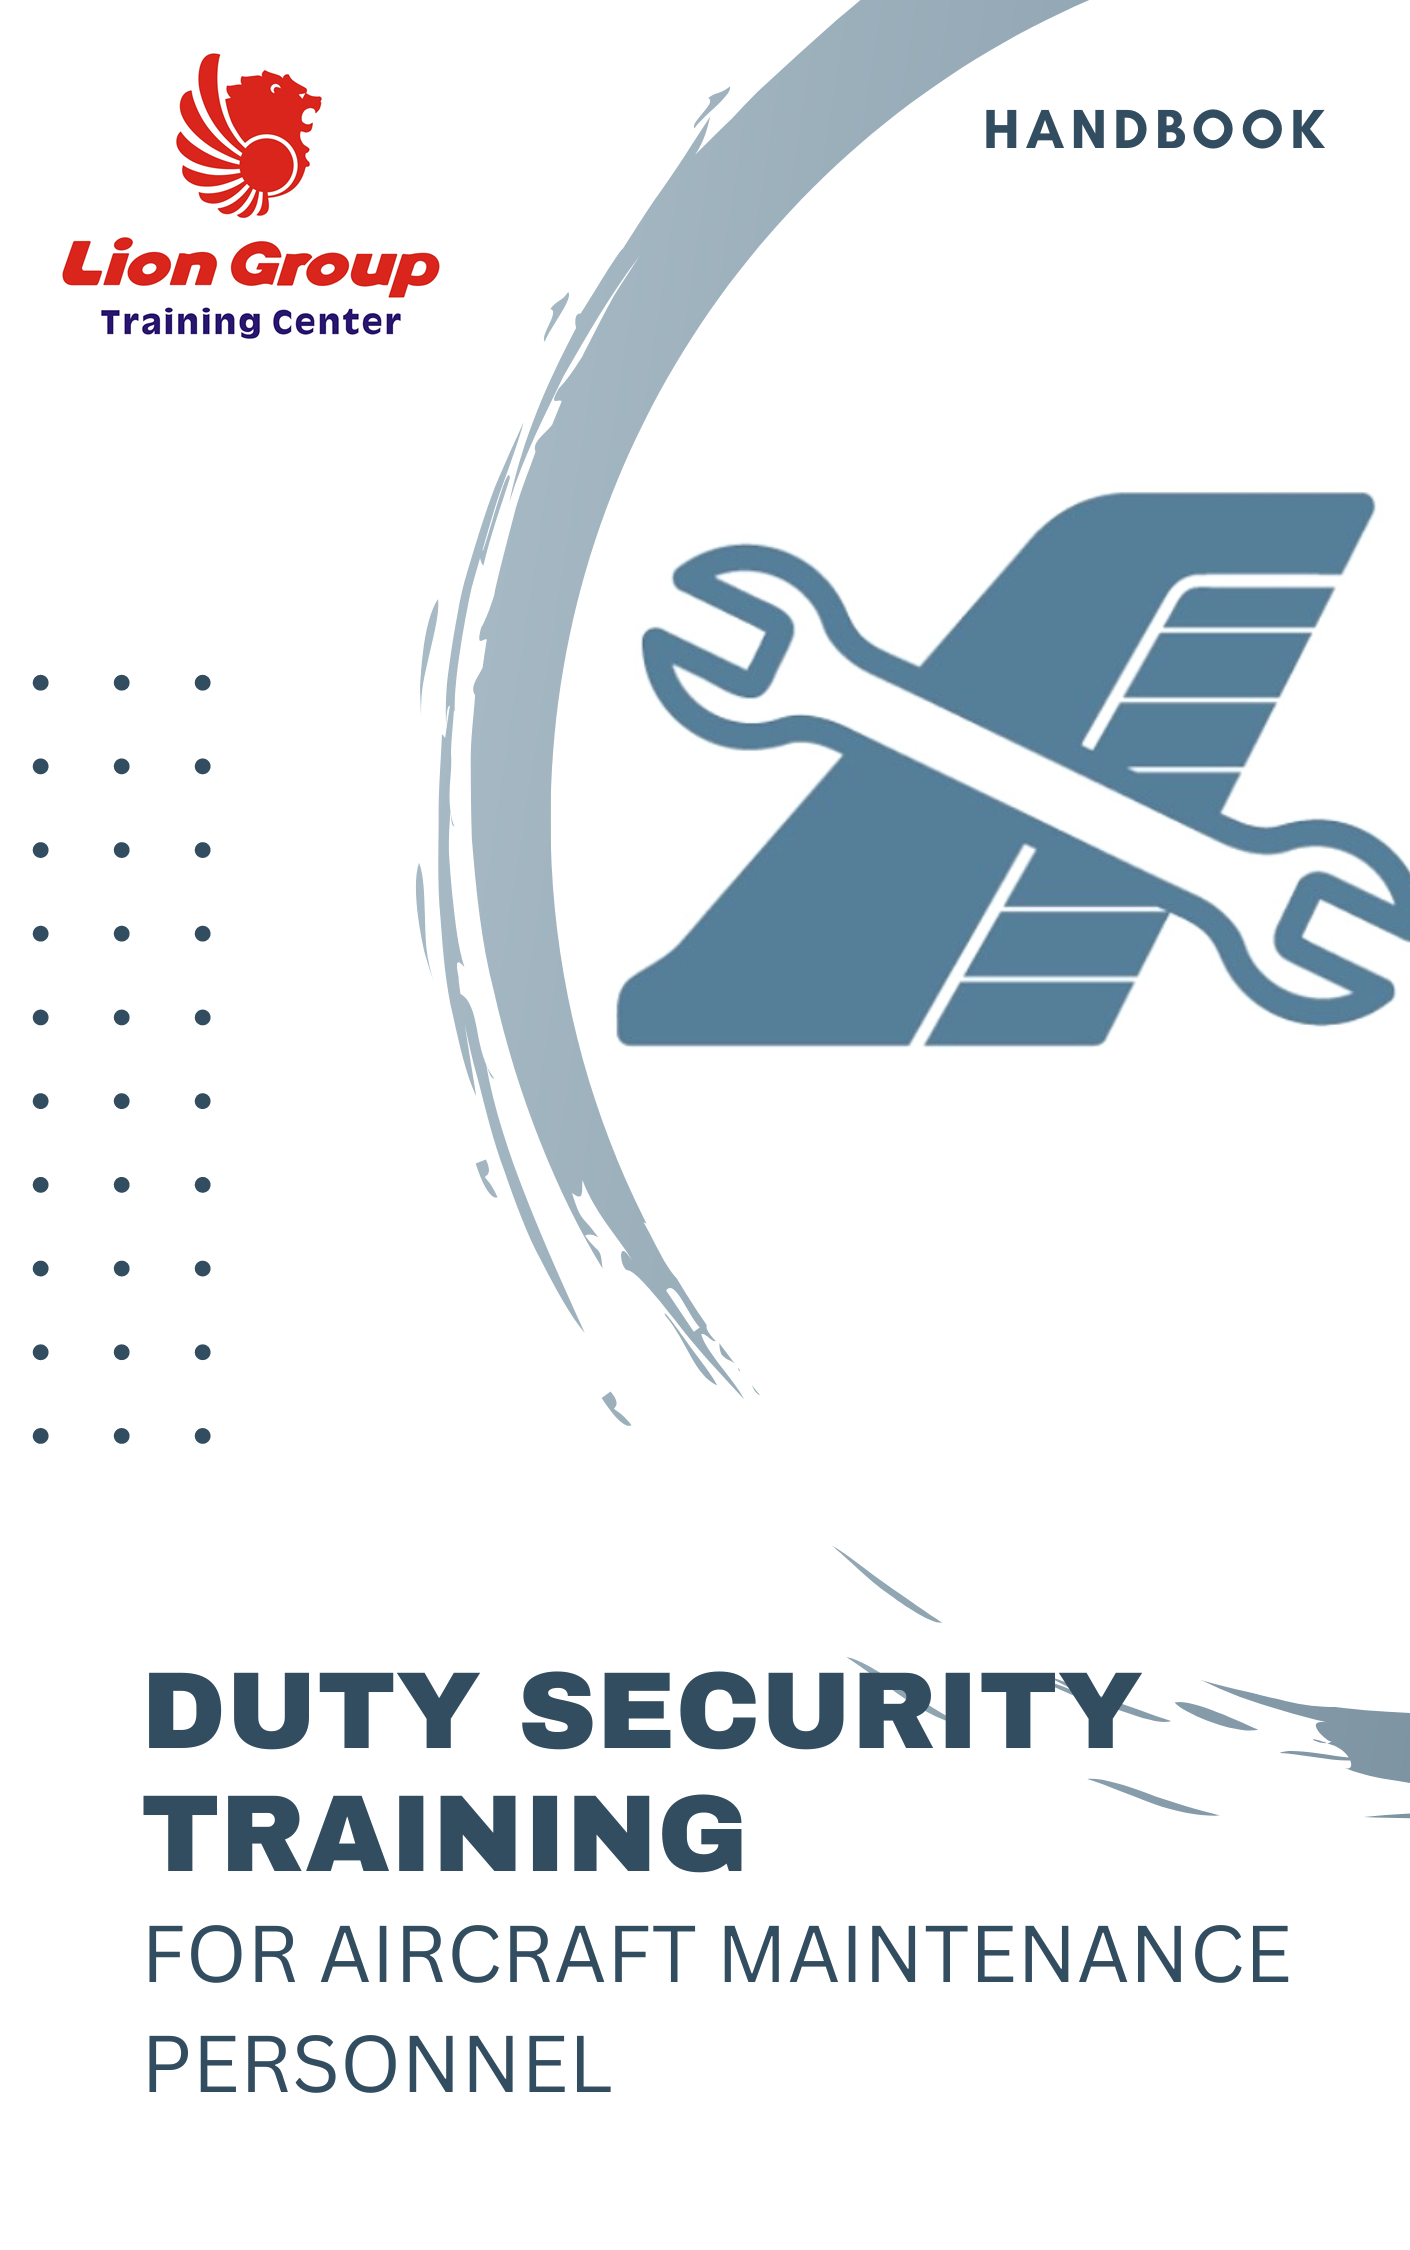 DUTY SECURITY TRAINING (DST) FOR AIRCRAFT MAINTENANCE PERSONNEL